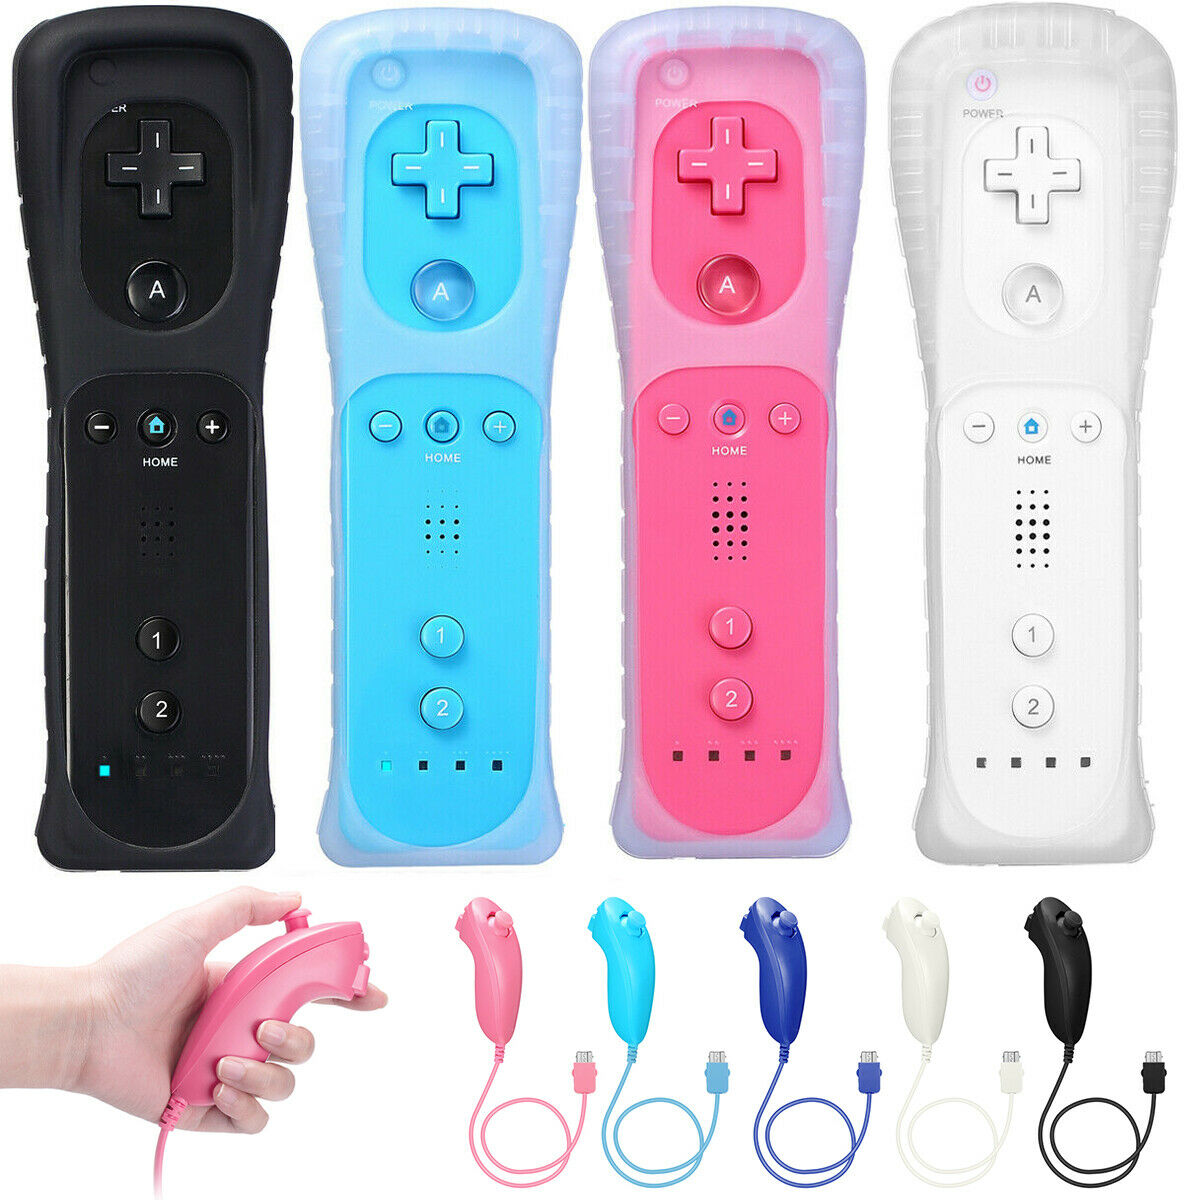 Built In Motion Plus Remote Controller&nunchuck For Nintendo Wii/wii U + Case Us